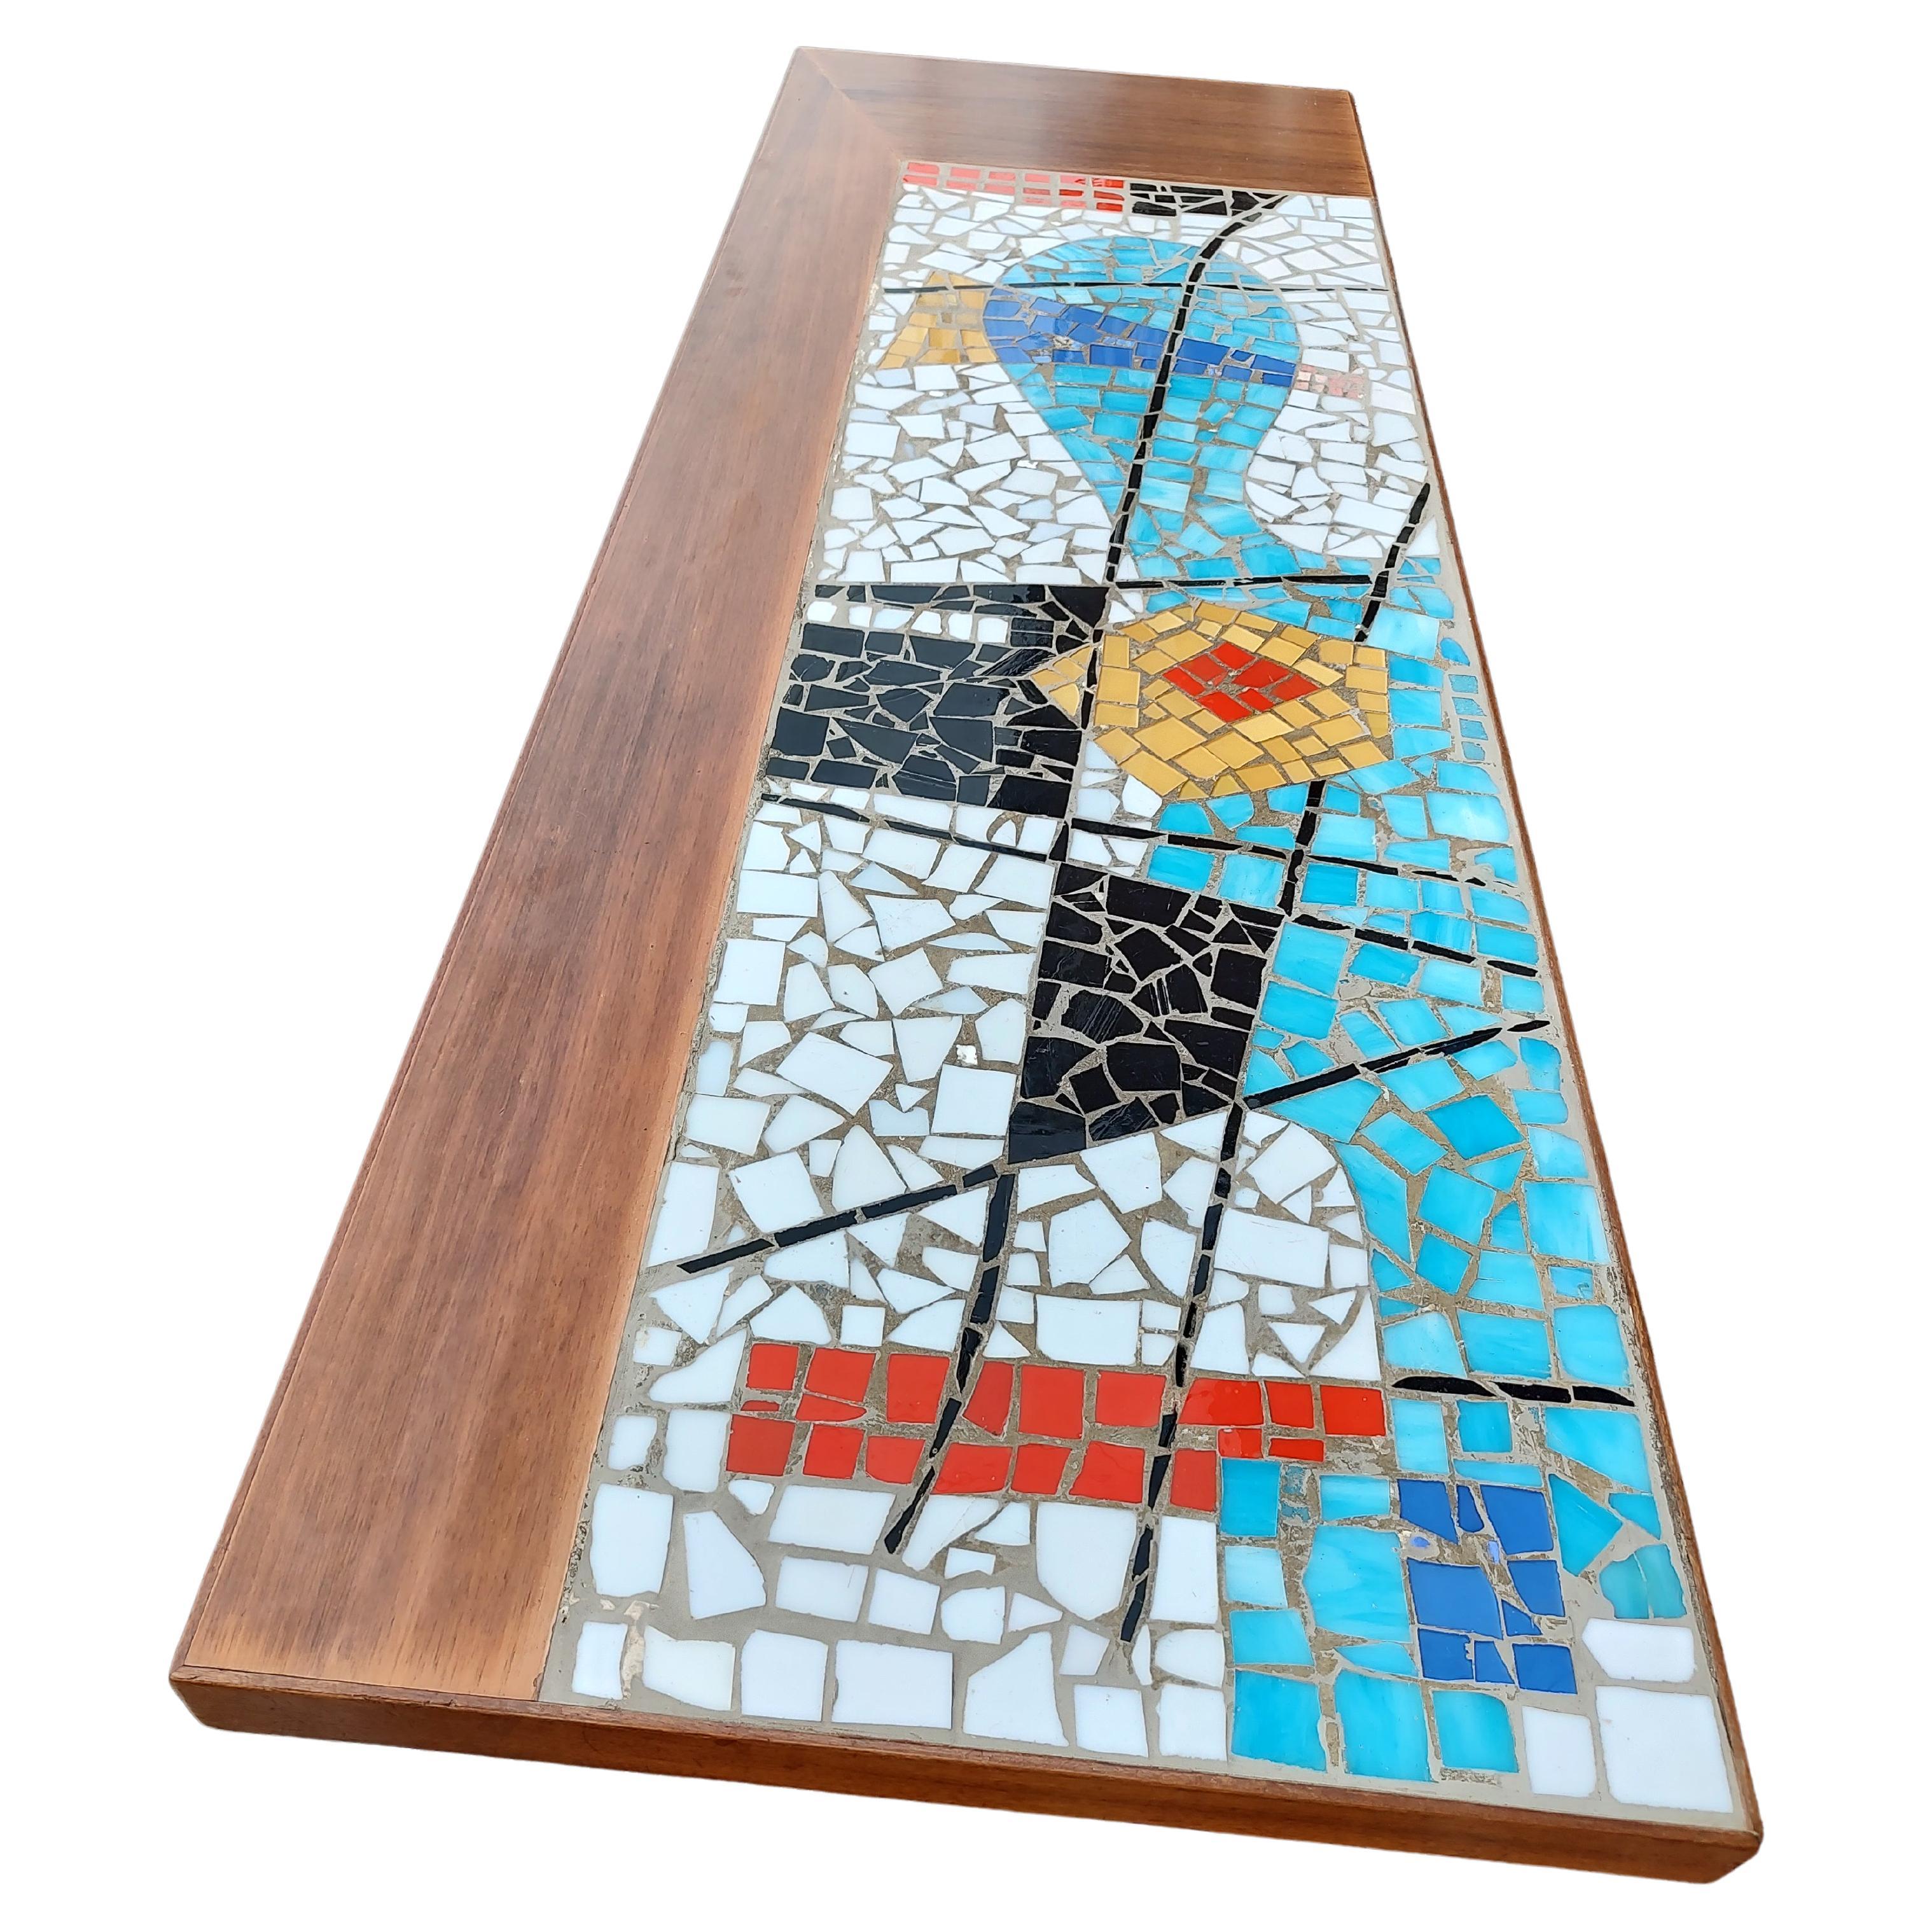 Mid-Century Modern Sculptural Abstract Mosaic Glass Tile Cocktail Table, C1955 In Good Condition For Sale In Port Jervis, NY